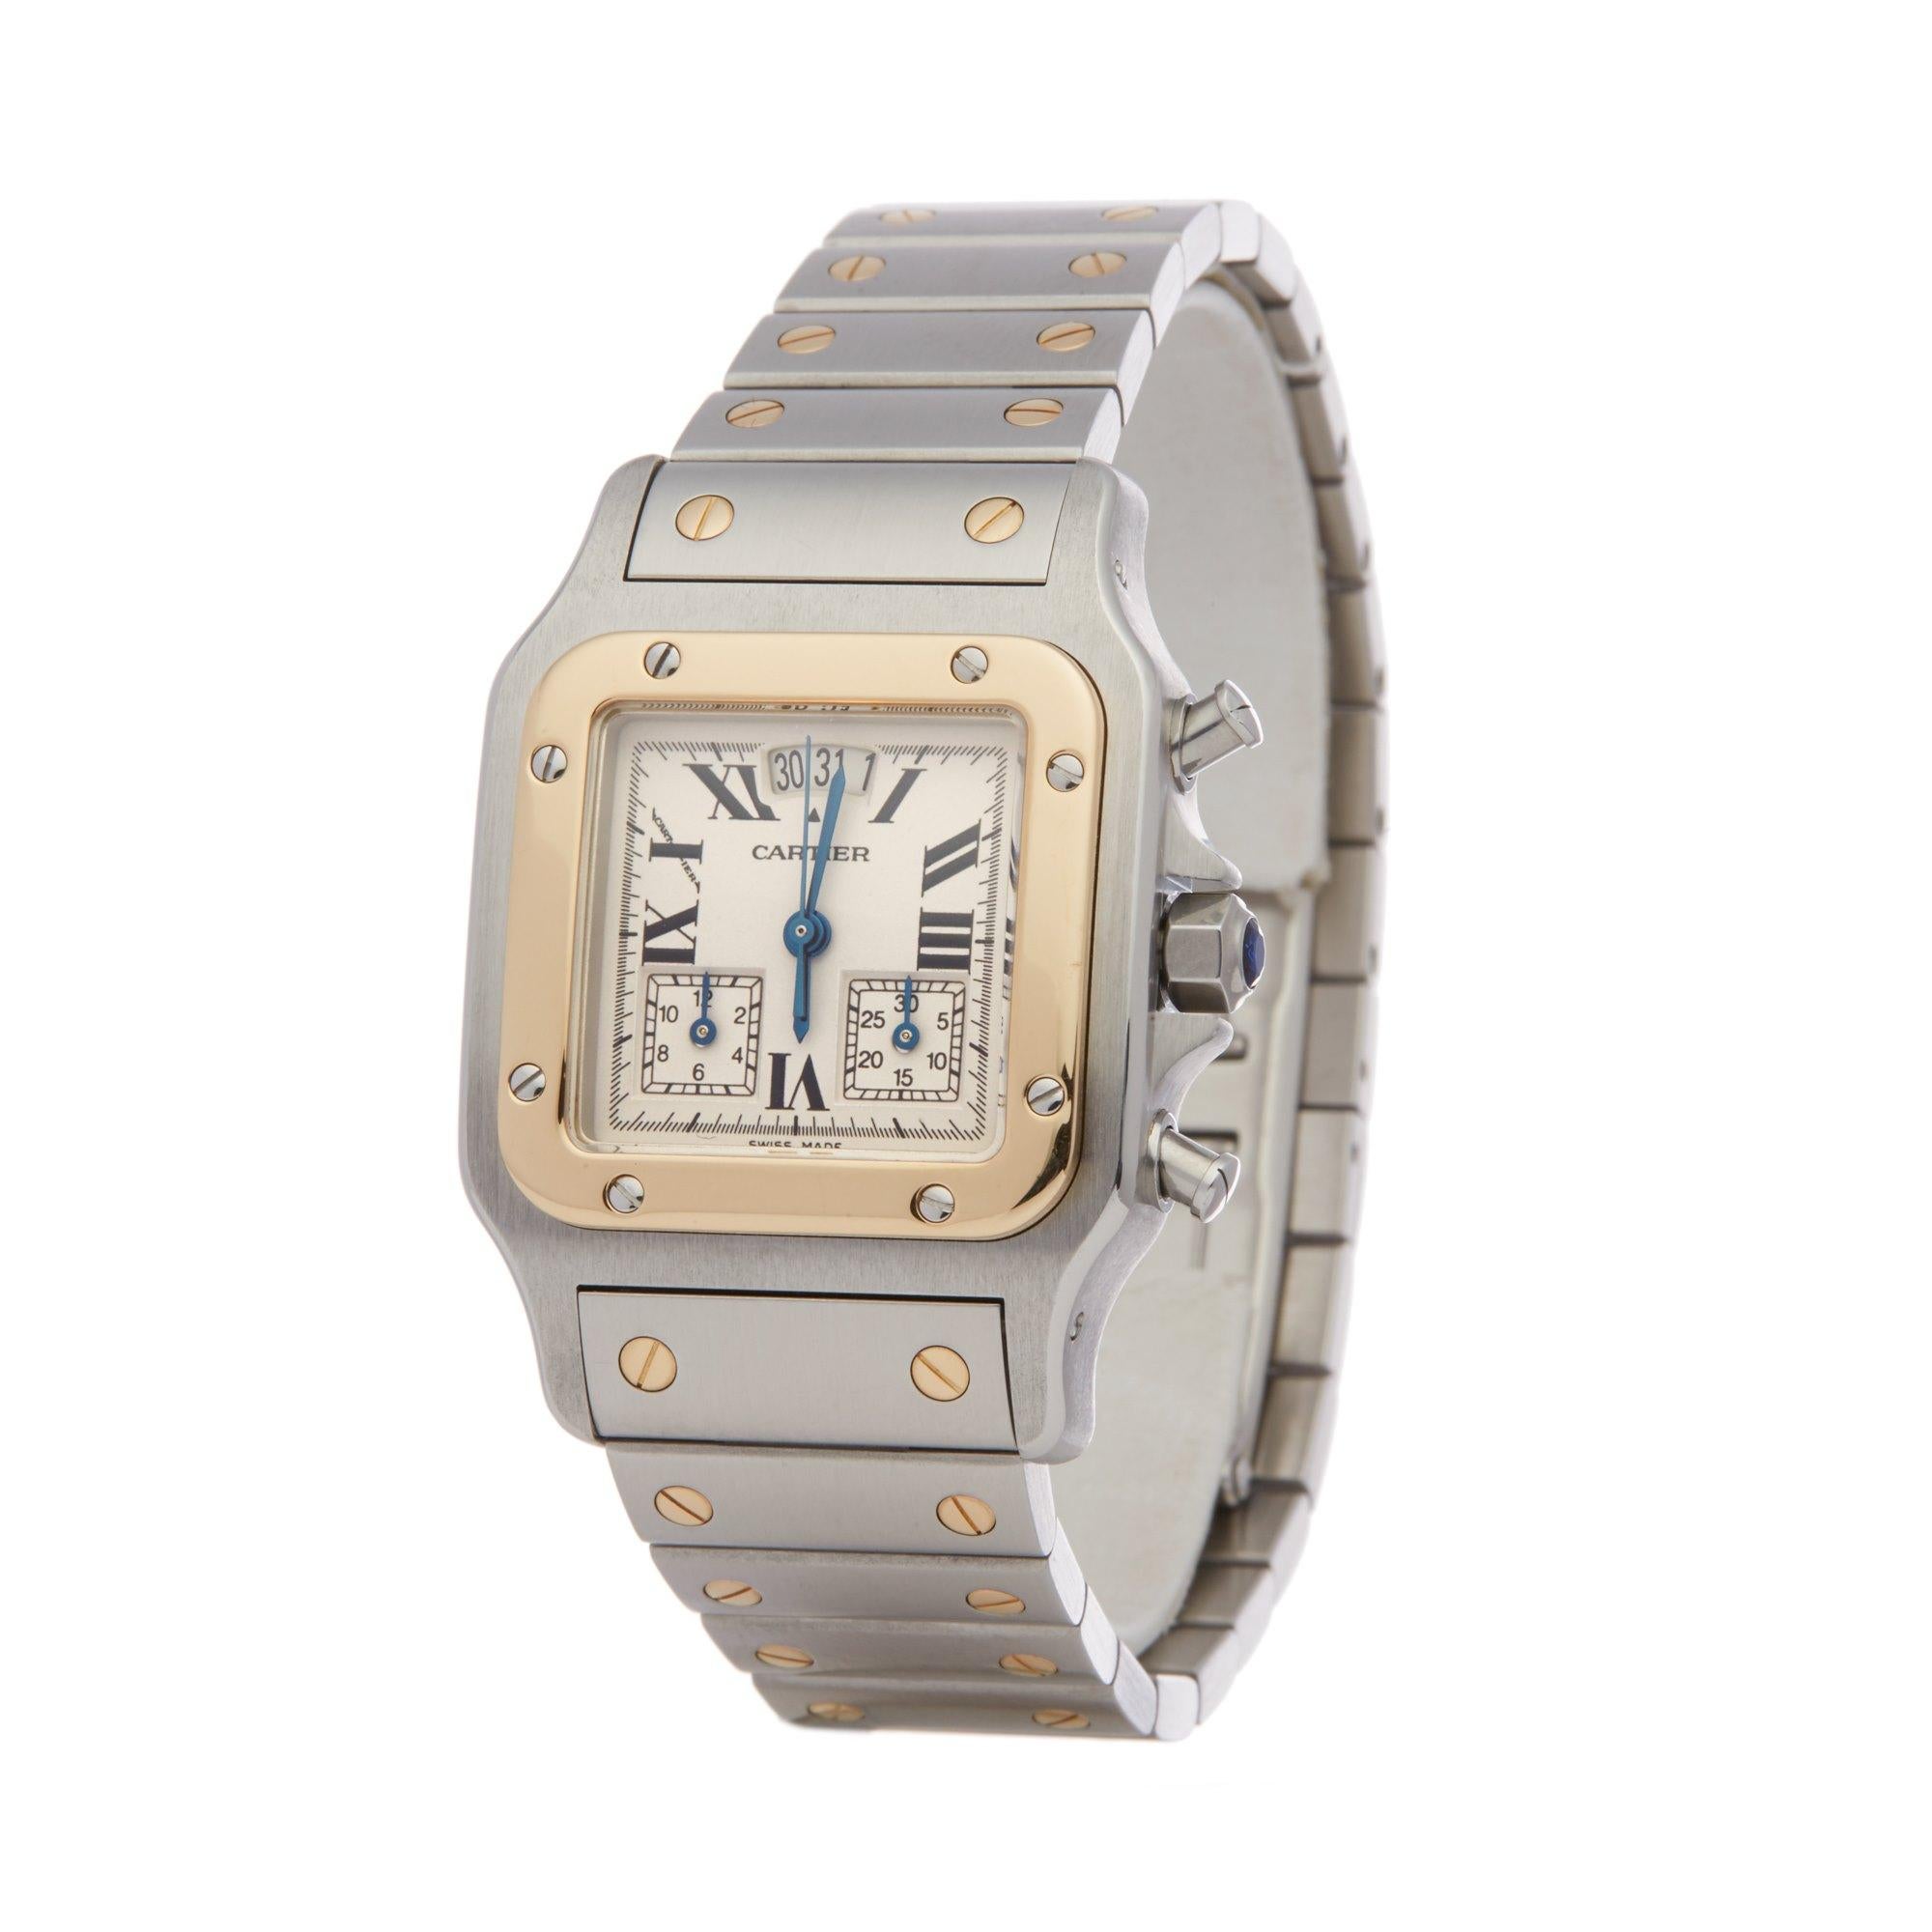 Xupes Reference: W007217
Manufacturer: Cartier
Model: Santos
Model Variant: Galbee
Model Number: 2425 or W20042C403
Age: 31-12-1998
Gender: Unisex
Complete With: Cartier Box, Manuals & Guarantee
Dial: White Roman
Glass: Sapphire Crystal
Case Size: